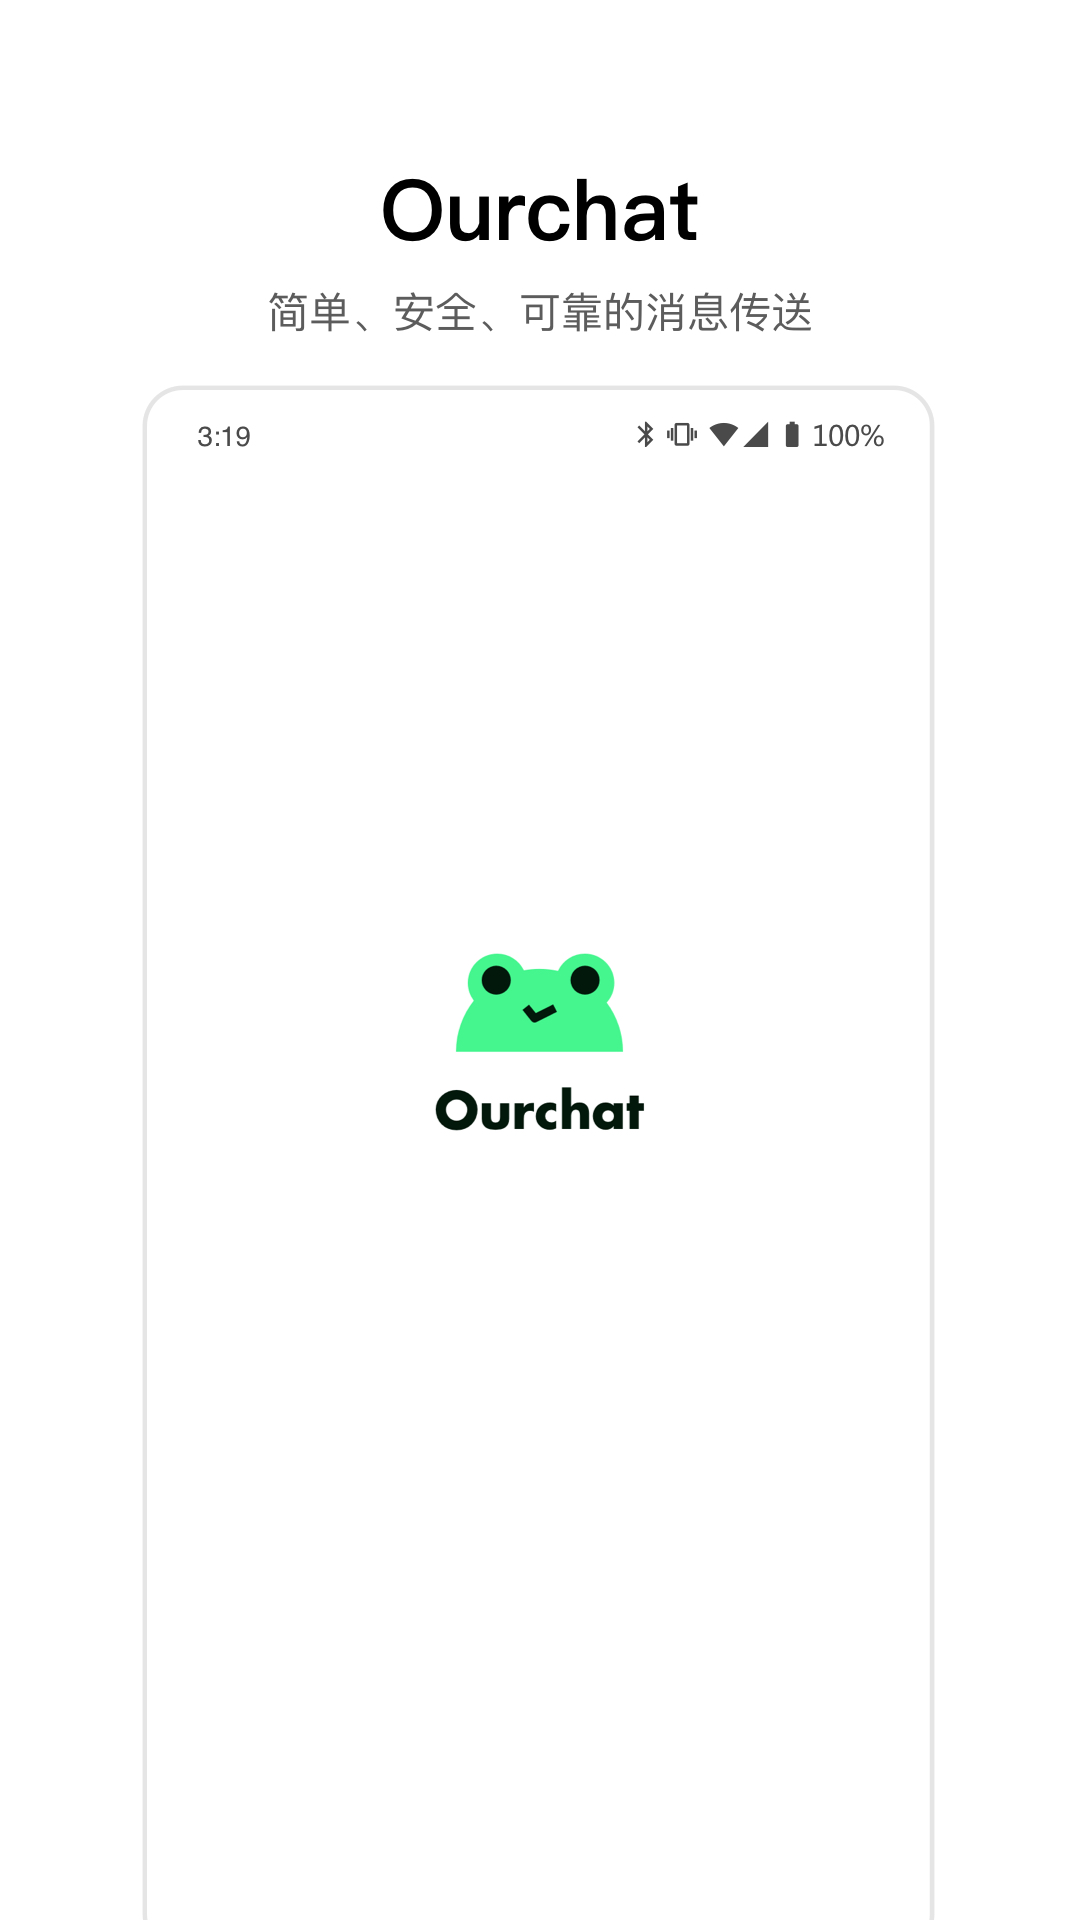 ourchat